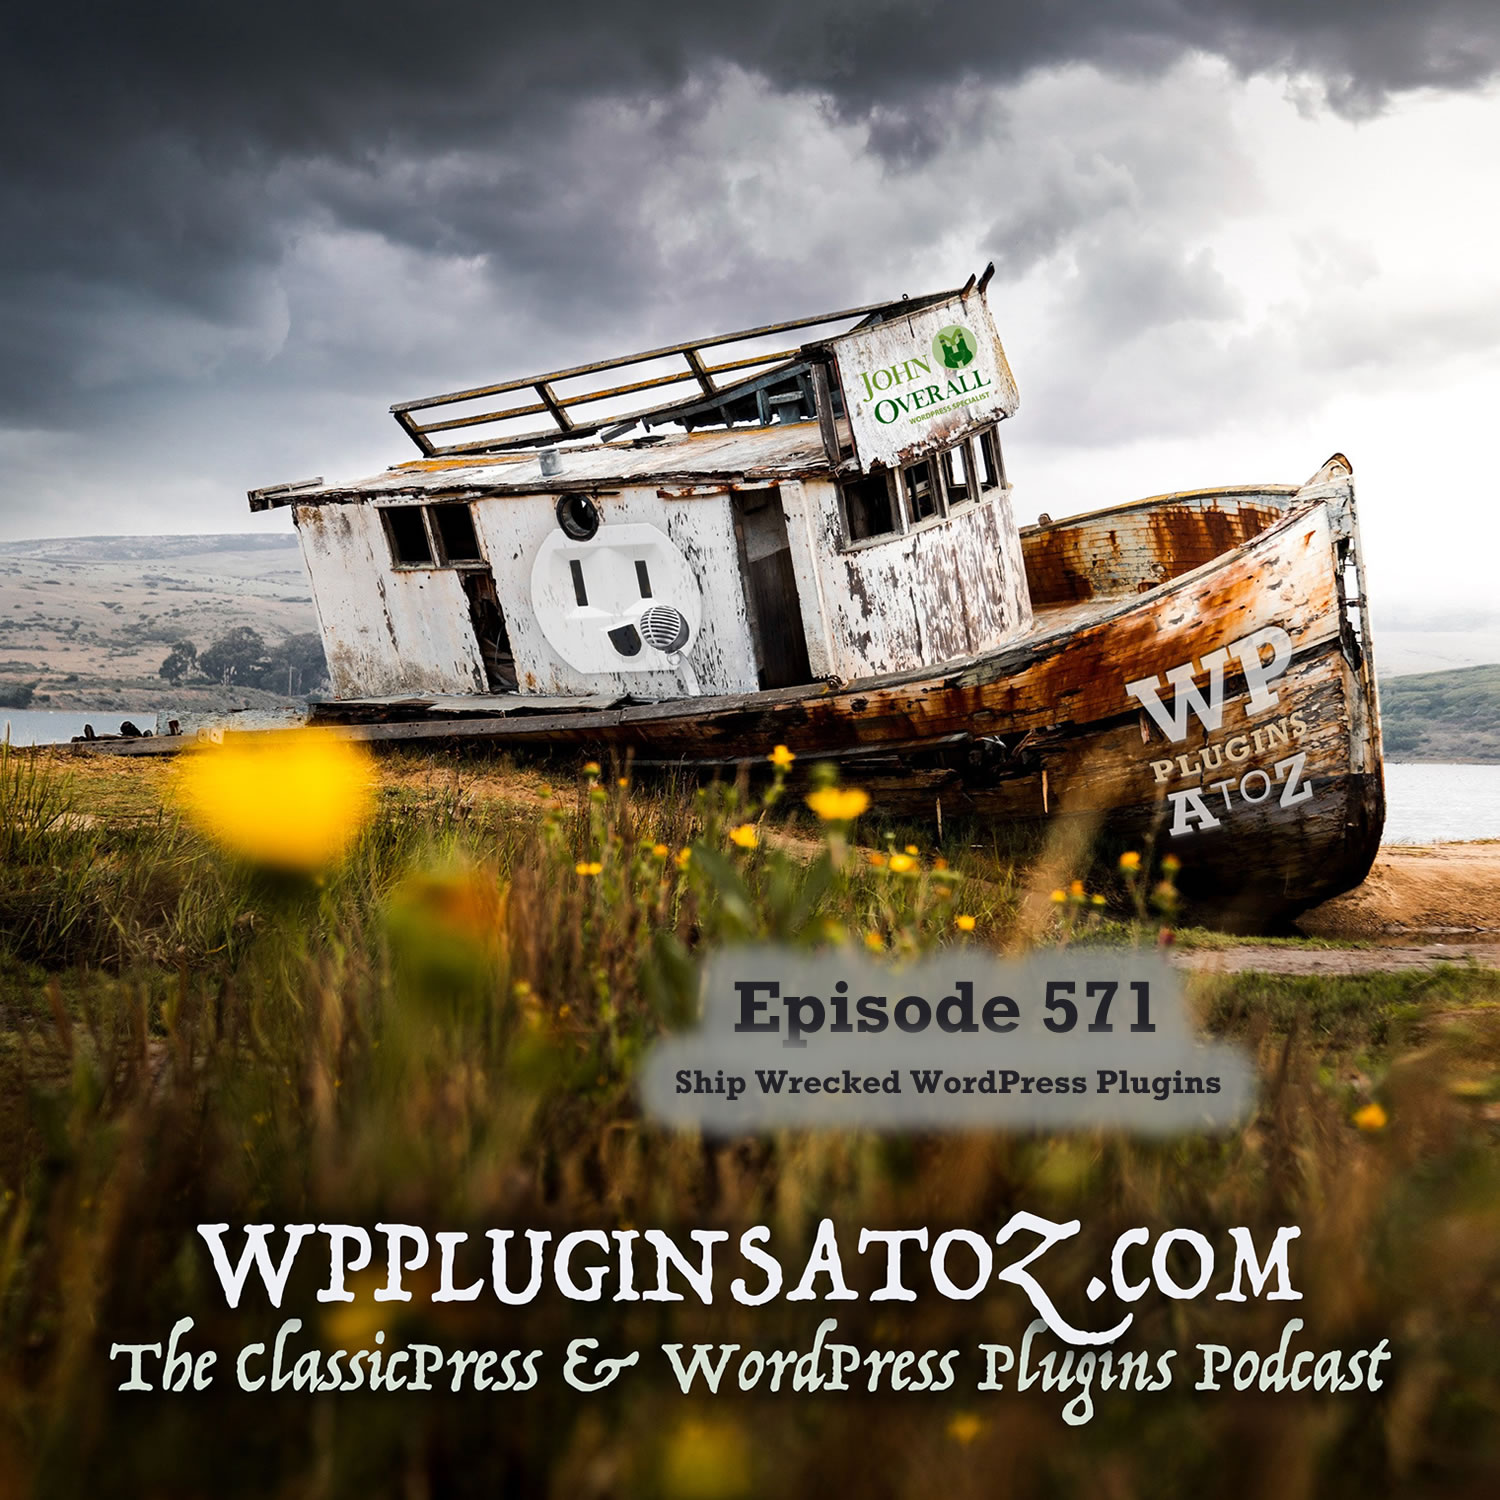 It's Episode 571 and we have plugins for User Logs, Thank-you Woo Pro, Preloading, Ultra Shortcodes, All the Socials, Responding Popups... and ClassicPress Options. It's all coming up on WordPress Plugins A-Z!